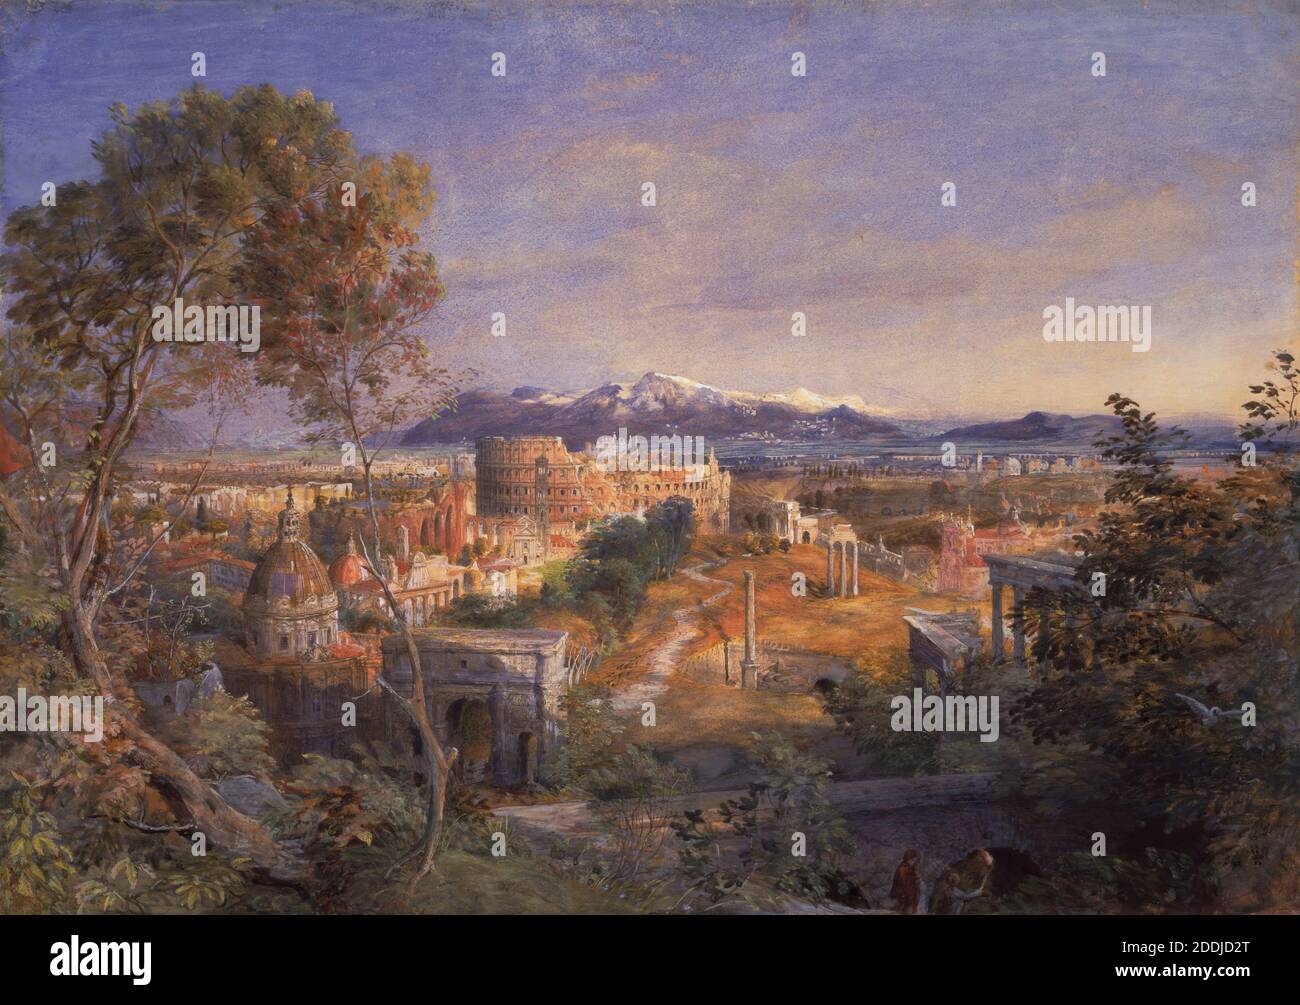 A View Of Ancient Rome, 1838 By Samuel Palmer, Landscape, Watercolour Stock Photo